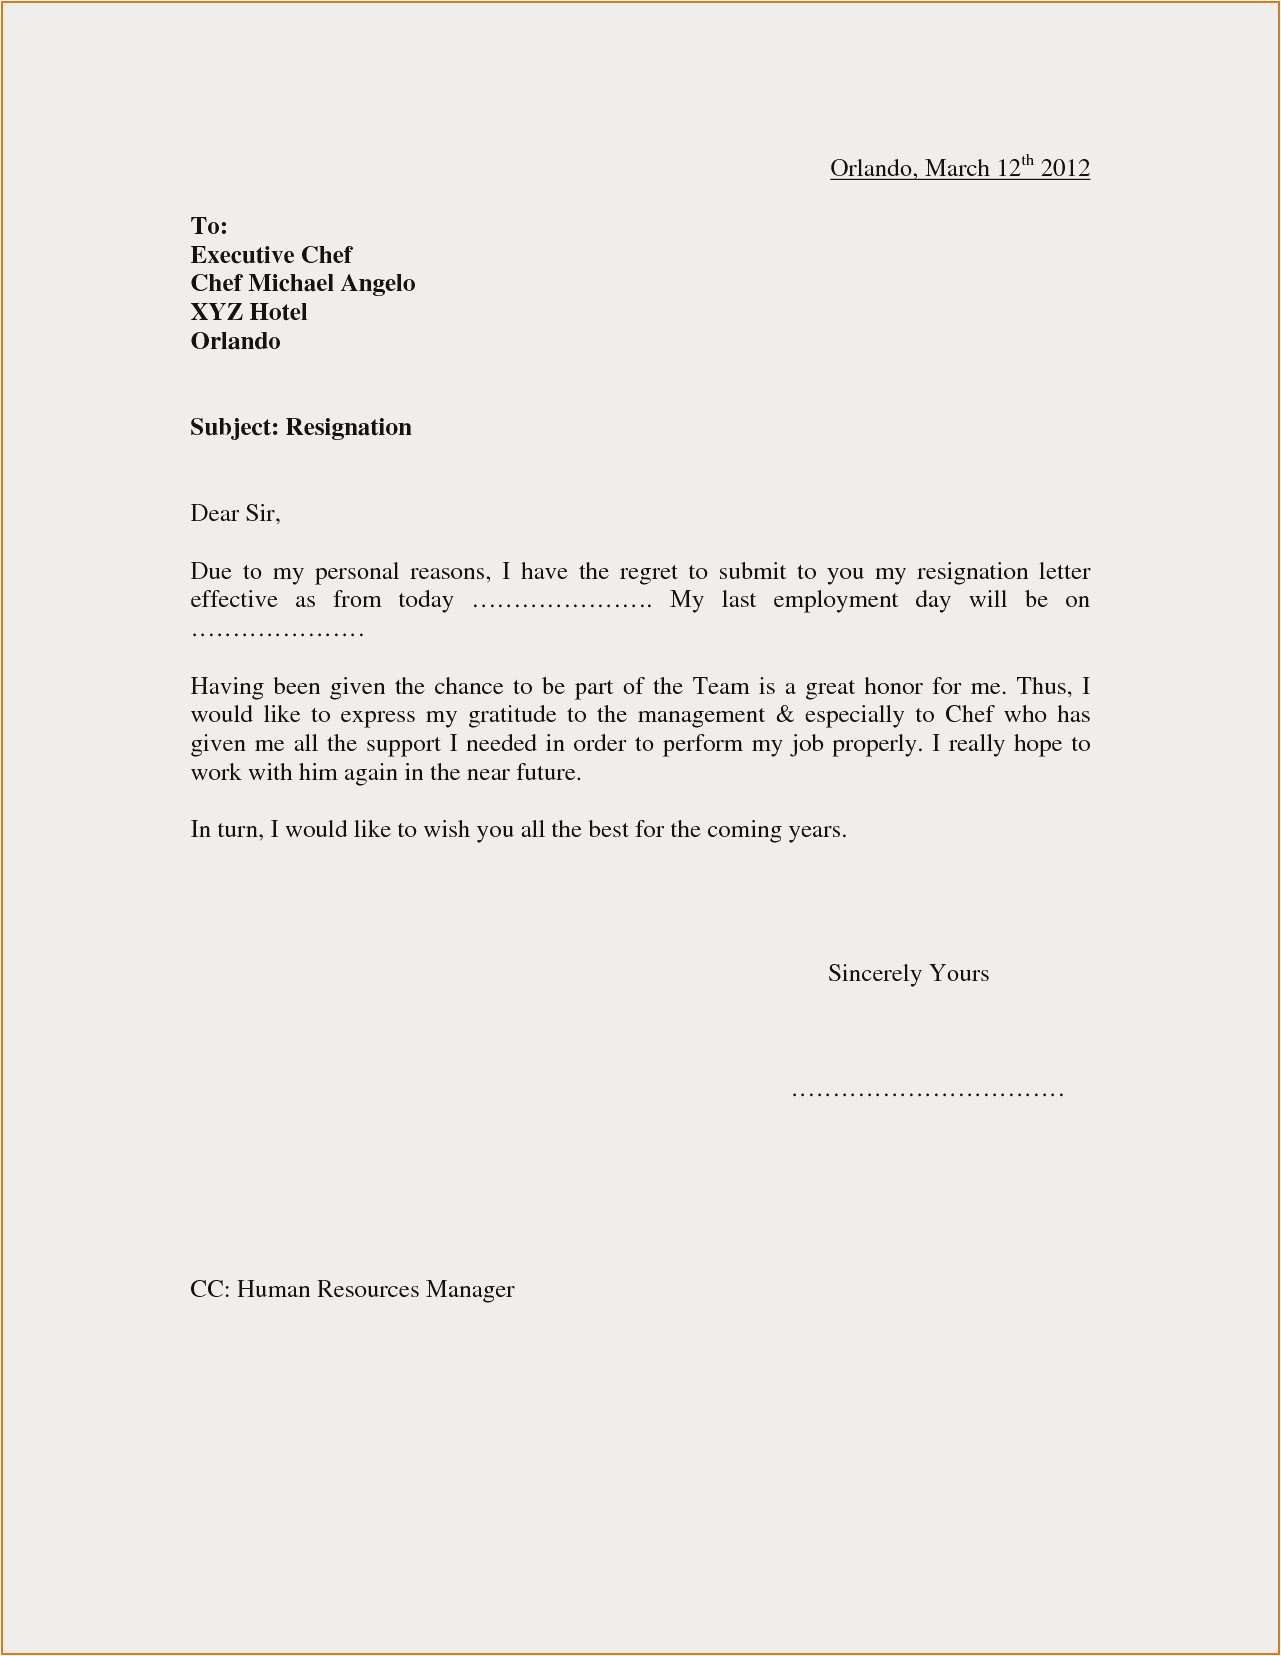 Resignation Letter After Short Employment from mthomearts.com